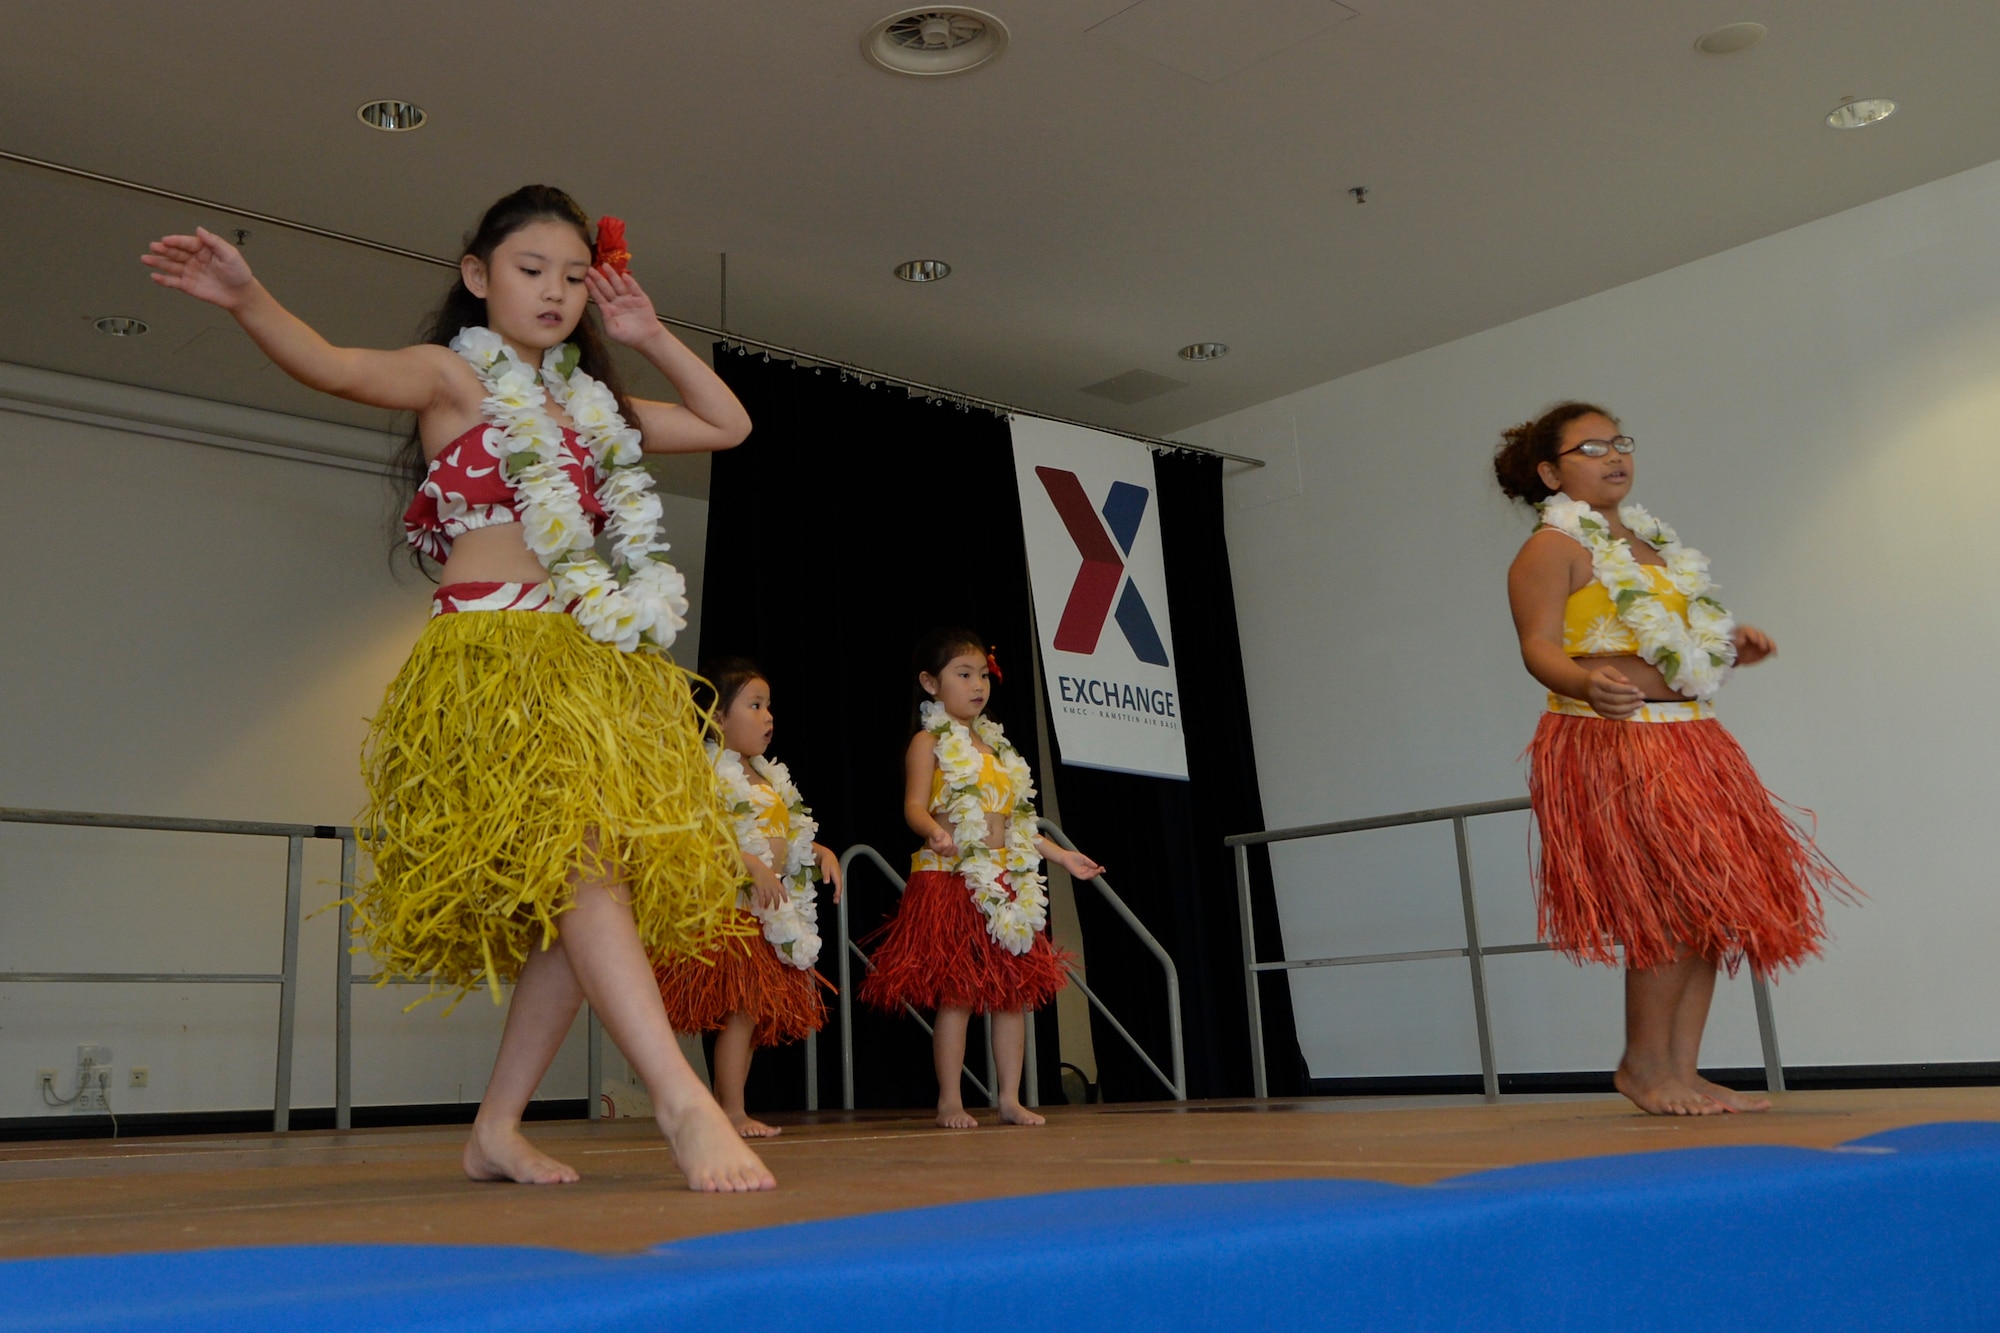 Kaiserslautern Military Community members perform a native hula dance during the 86th Airlift Wing’s Diversity Day on Ramstein Air Base, Sept. 28, 2018. The event aimed to enhance cross-cultural and cross-gender awareness while promoting harmony among all military members, their families, and the DOD civilian workforce. (U.S. Air Force photo by Staff Sgt. Nesha Humes Stanton)